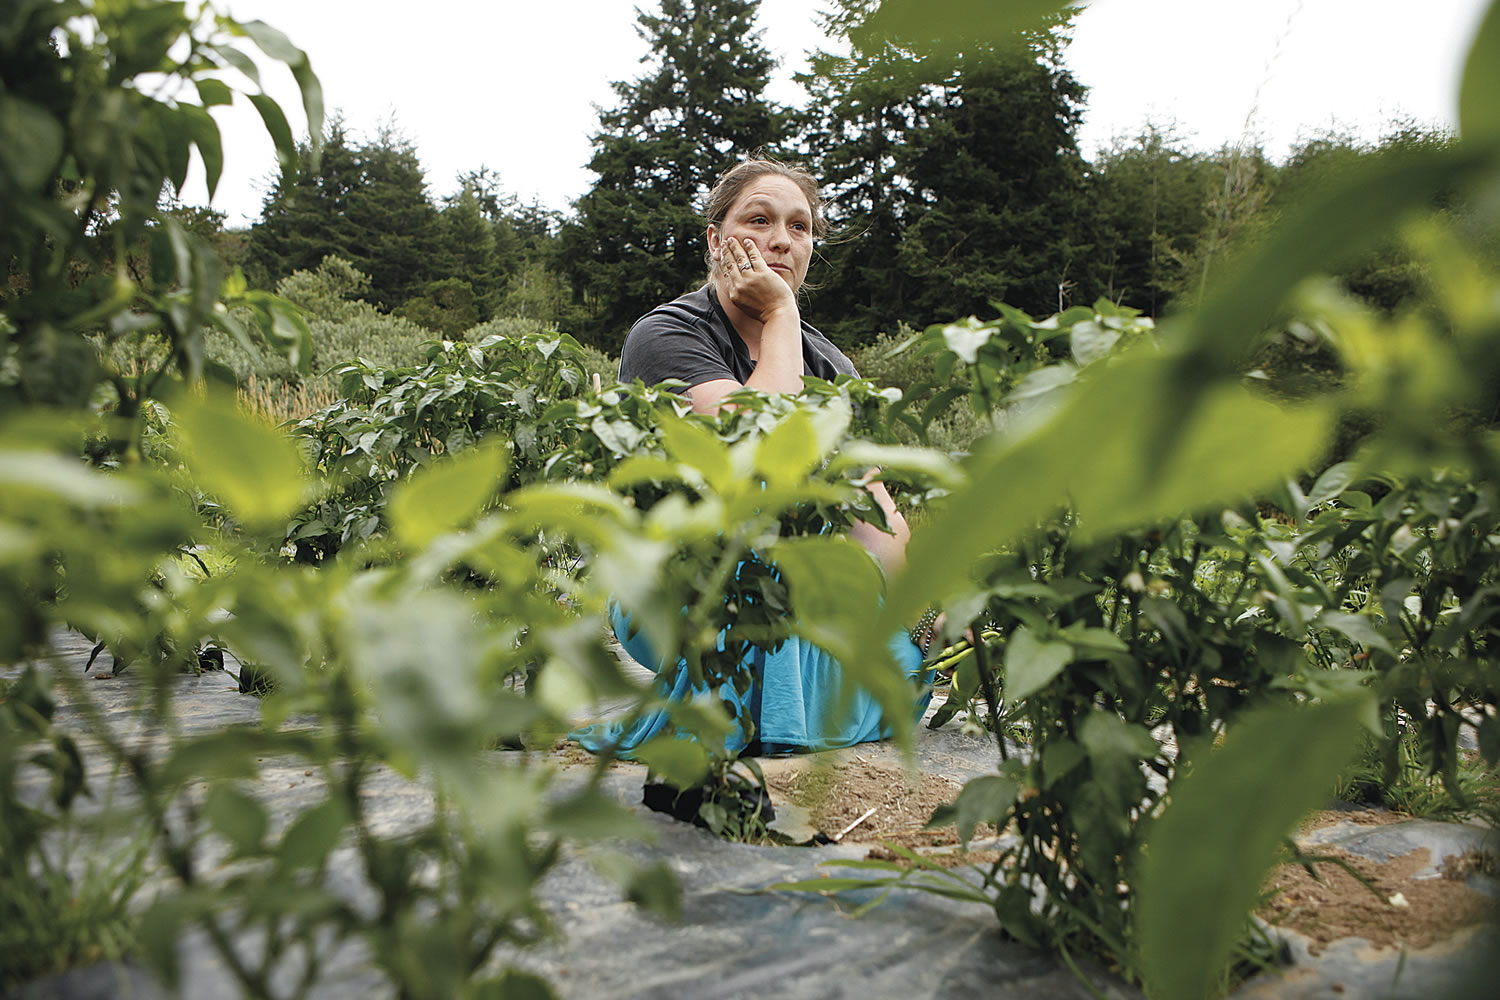 Sarah Crawford pauses while discussing the potential consequences to the Flicker Community Garden if the Coquille Valley, near Coquille, Ore., wetland restoration project moves forward.